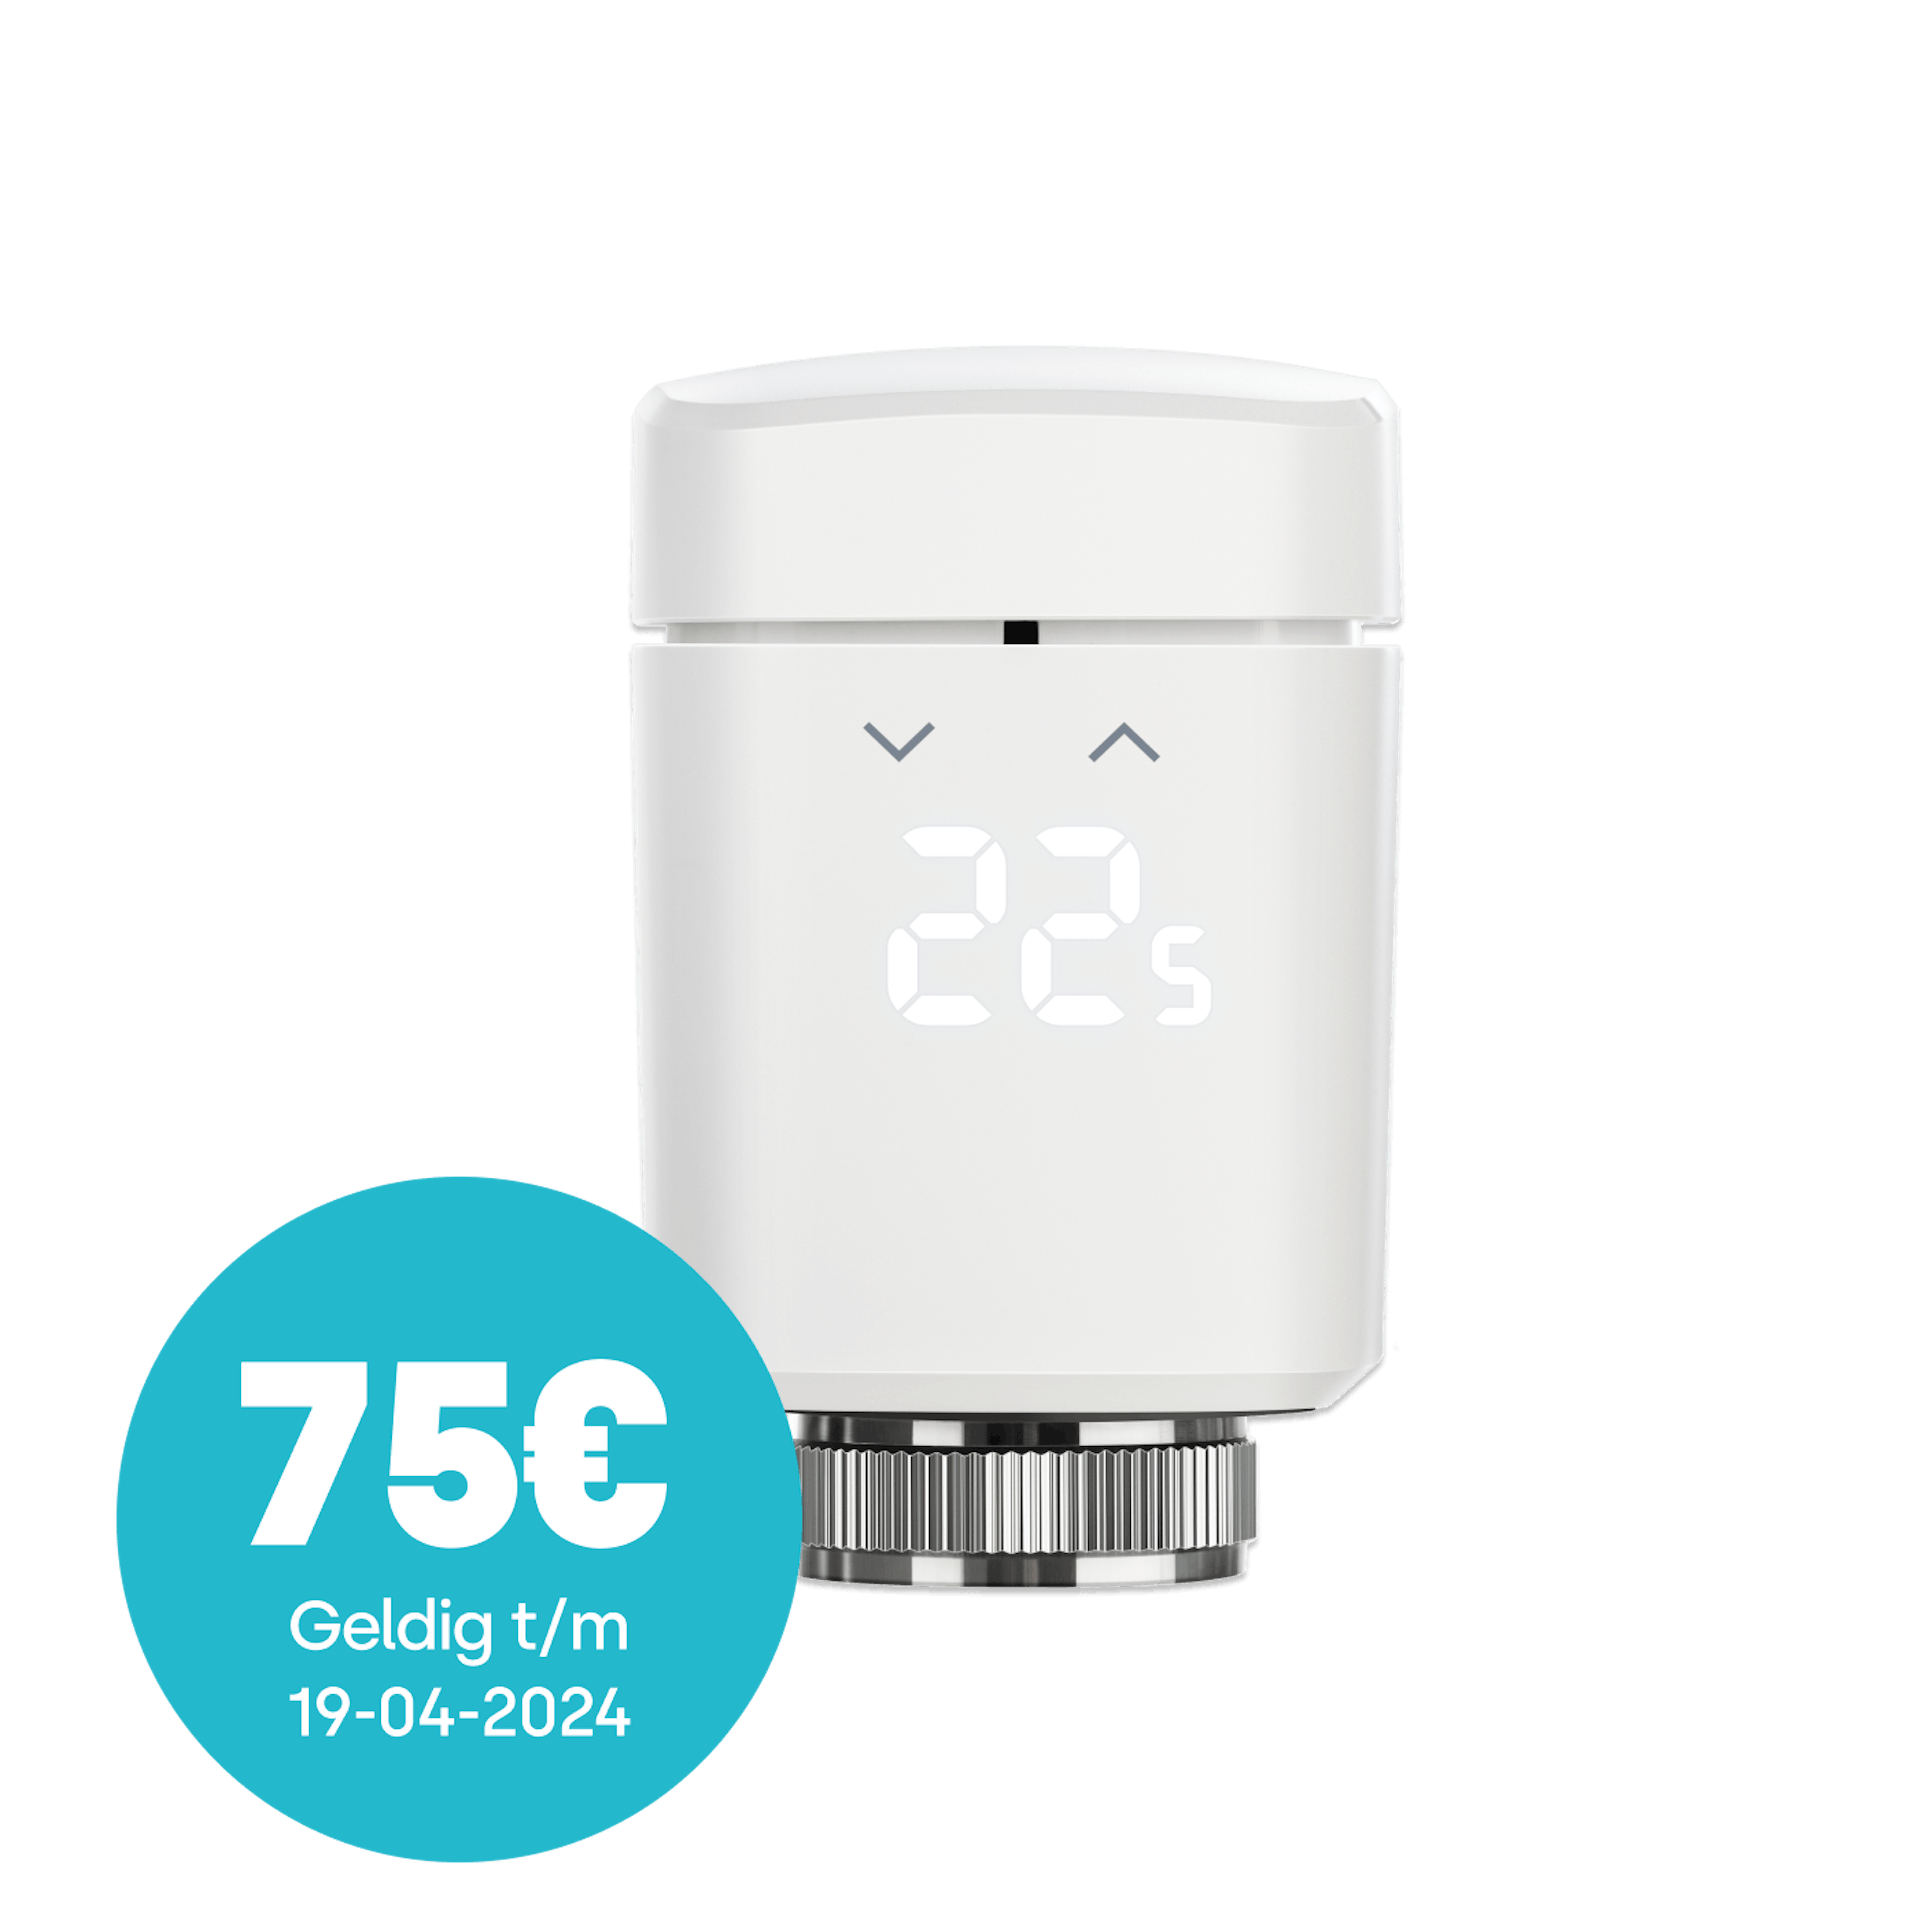 Eve Thermo – Slimme radiatorthermostaat